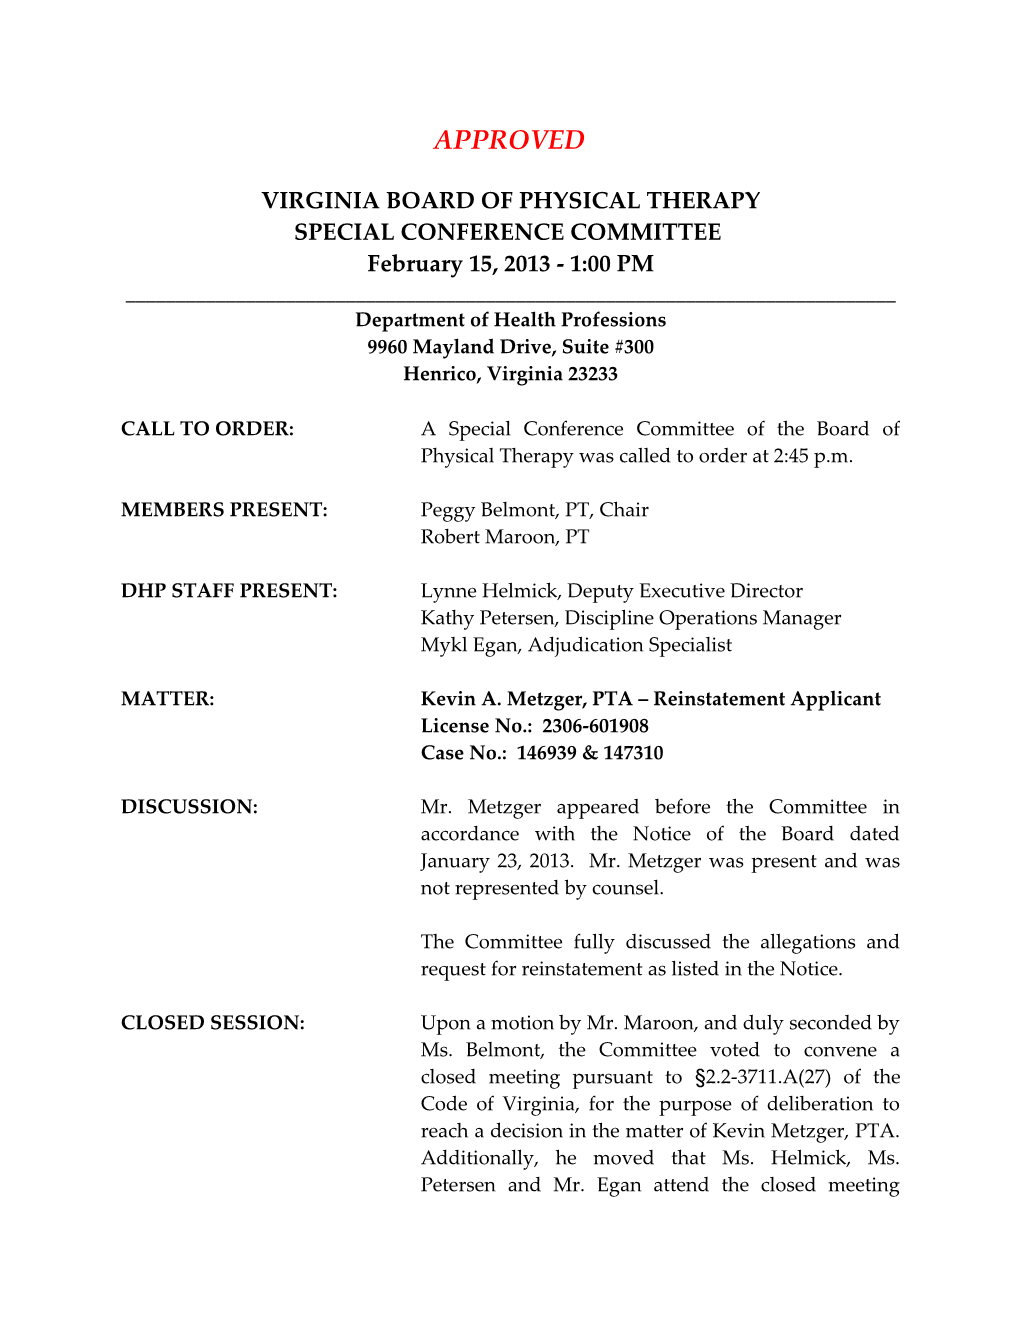 Virginia Board of Physical Therapy s2